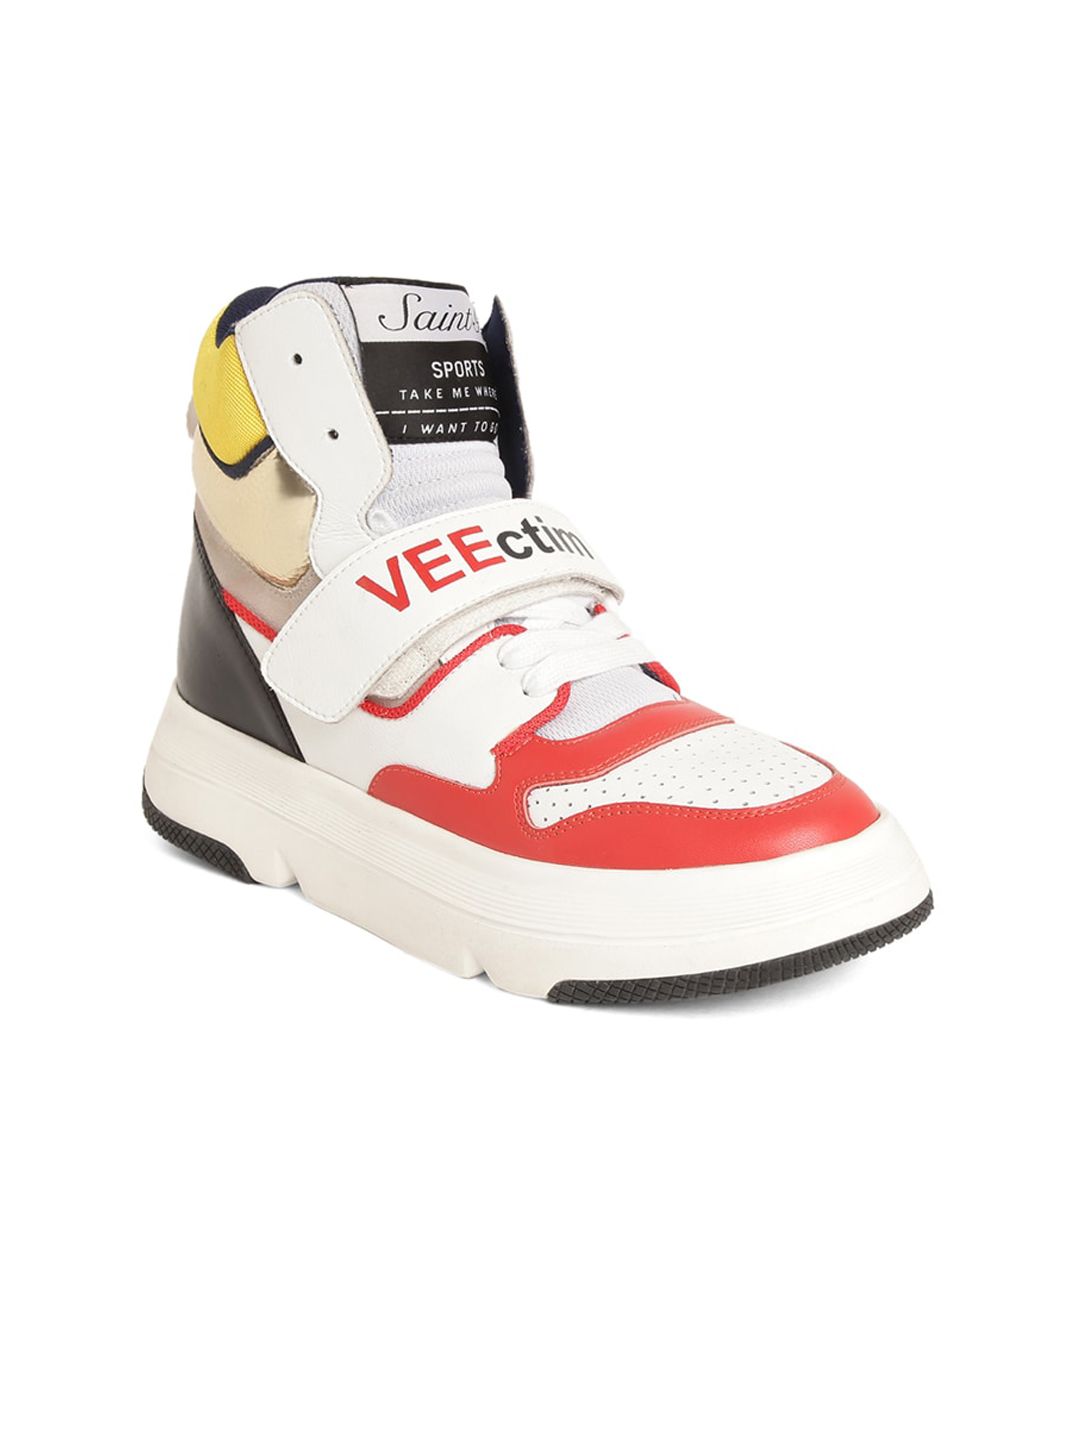 Saint G Women White & Red Colourblocked Mid-Top Lightweight Leather Sneakers Price in India